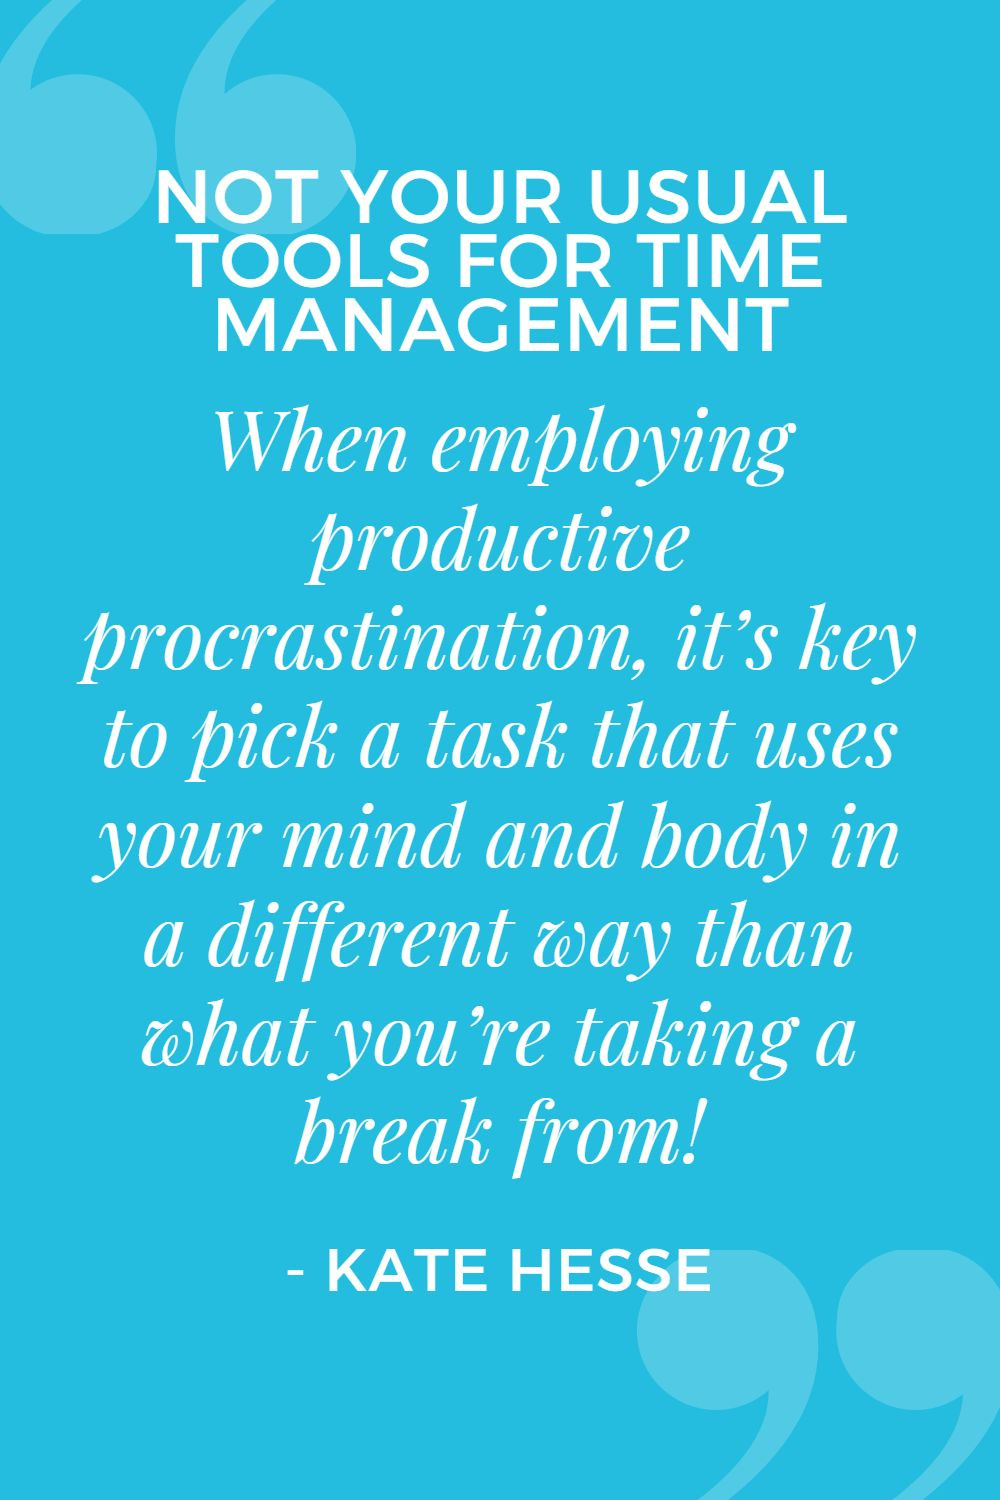 When employing productive procrastination, it's key to pick a task that uses your mind and body in a different way than what you're taking a break from!